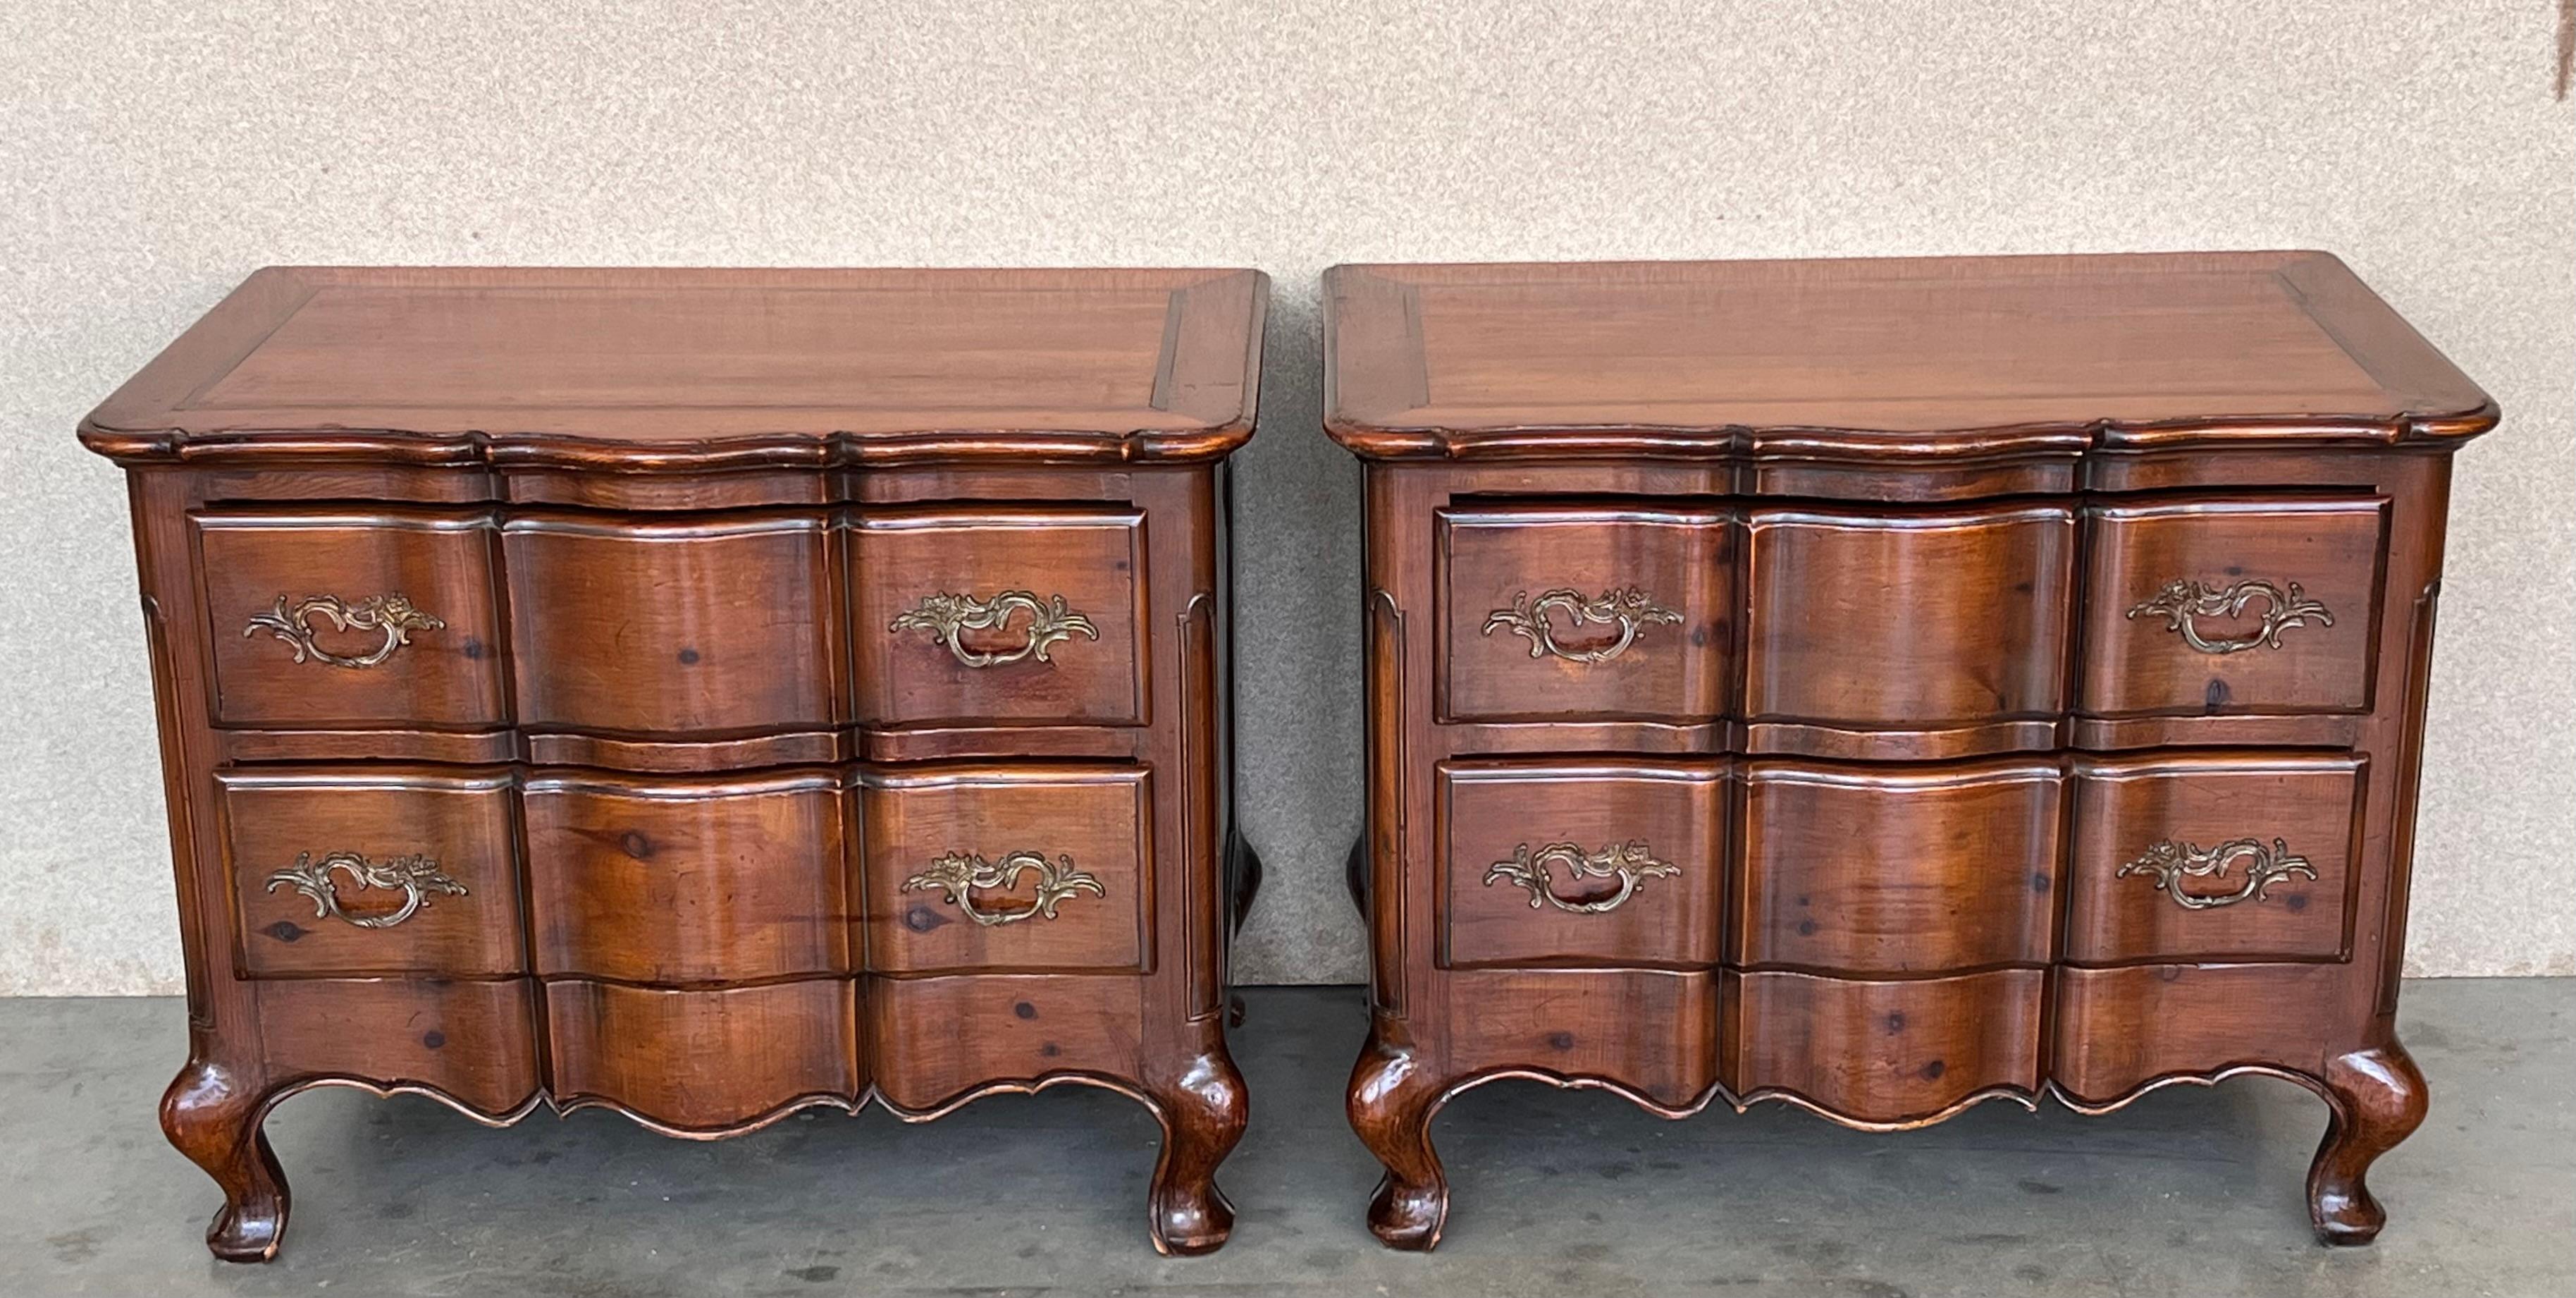 Wonderful pair of late 19th century Italian chests or commodinis made of burled walnut in the Baroque Venetian style. Each oxbow front chest has a beautifully shaped top, front, and sides with heavily burled insets outlined in walnut banding. The